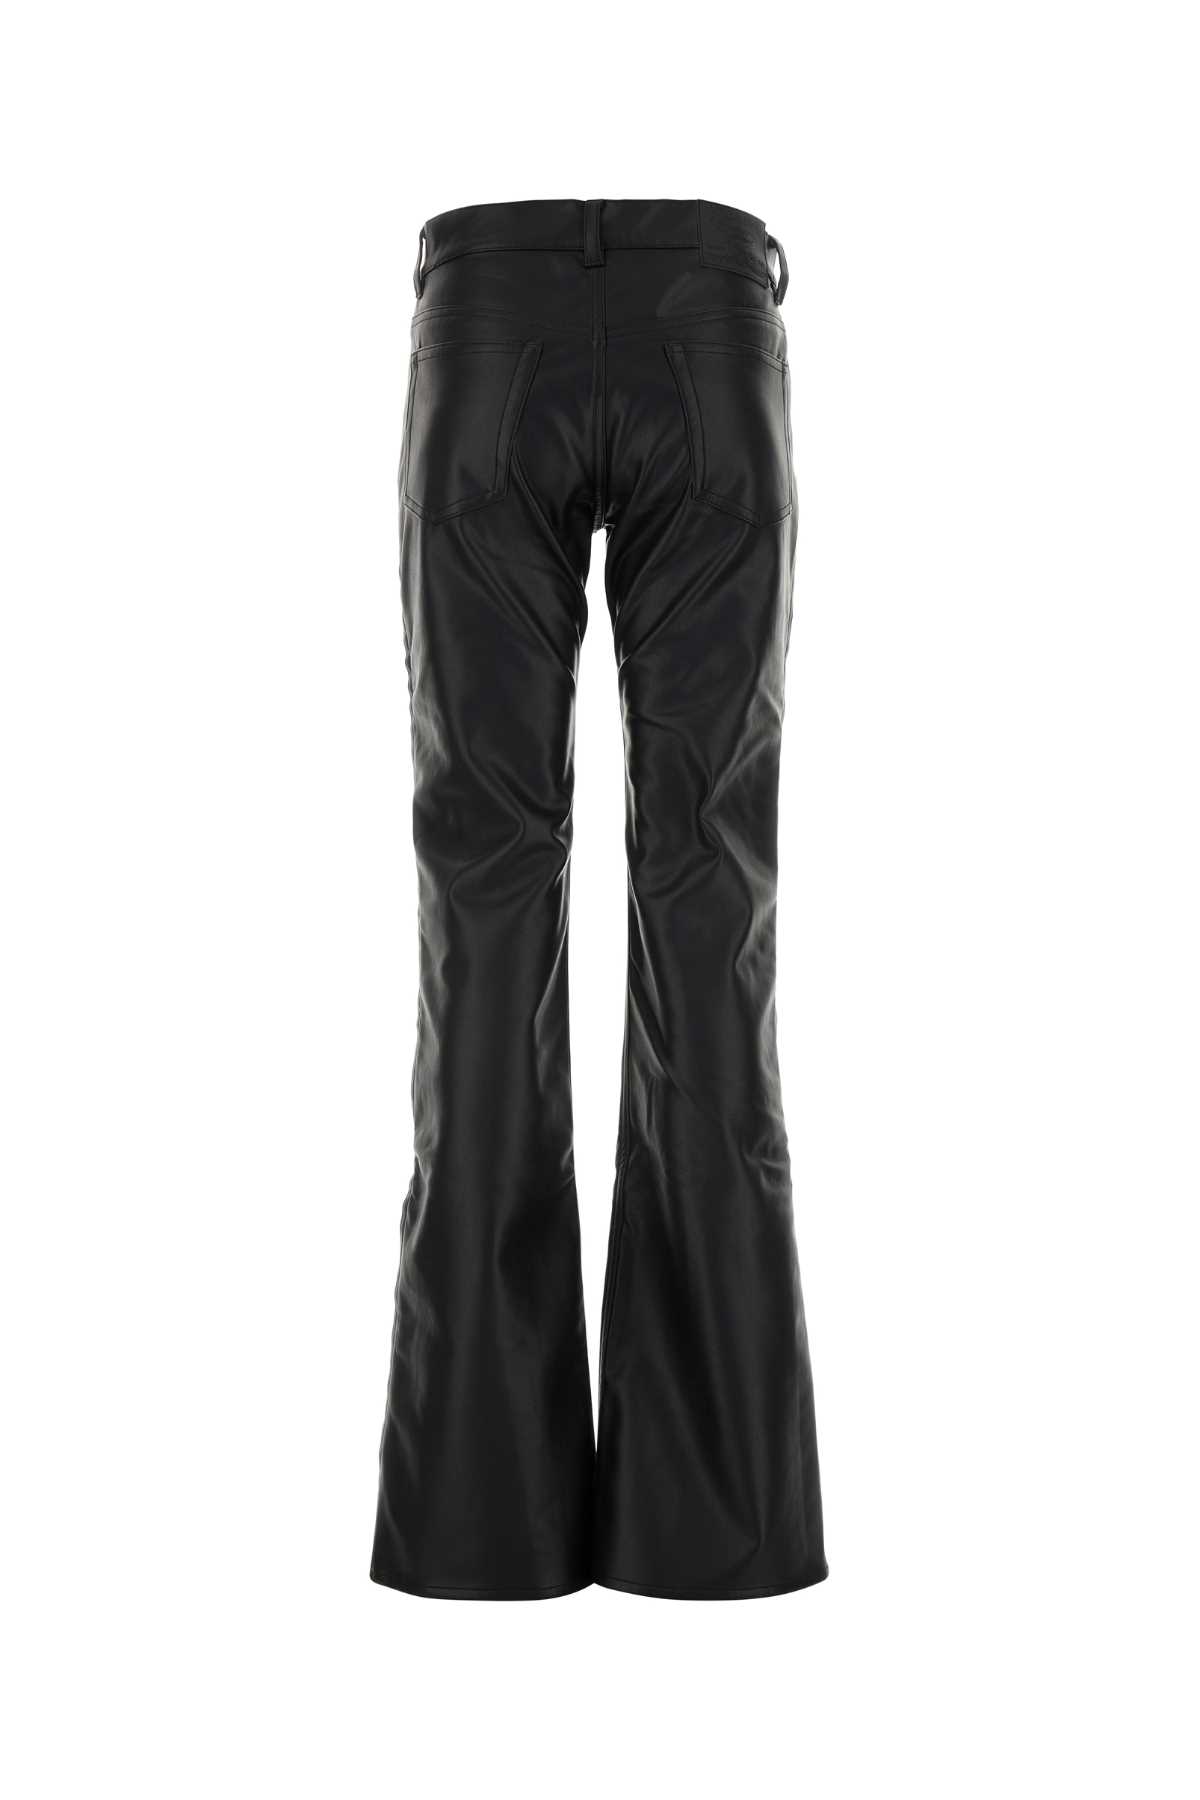 Y/project Black Synthetic Leather Trouser